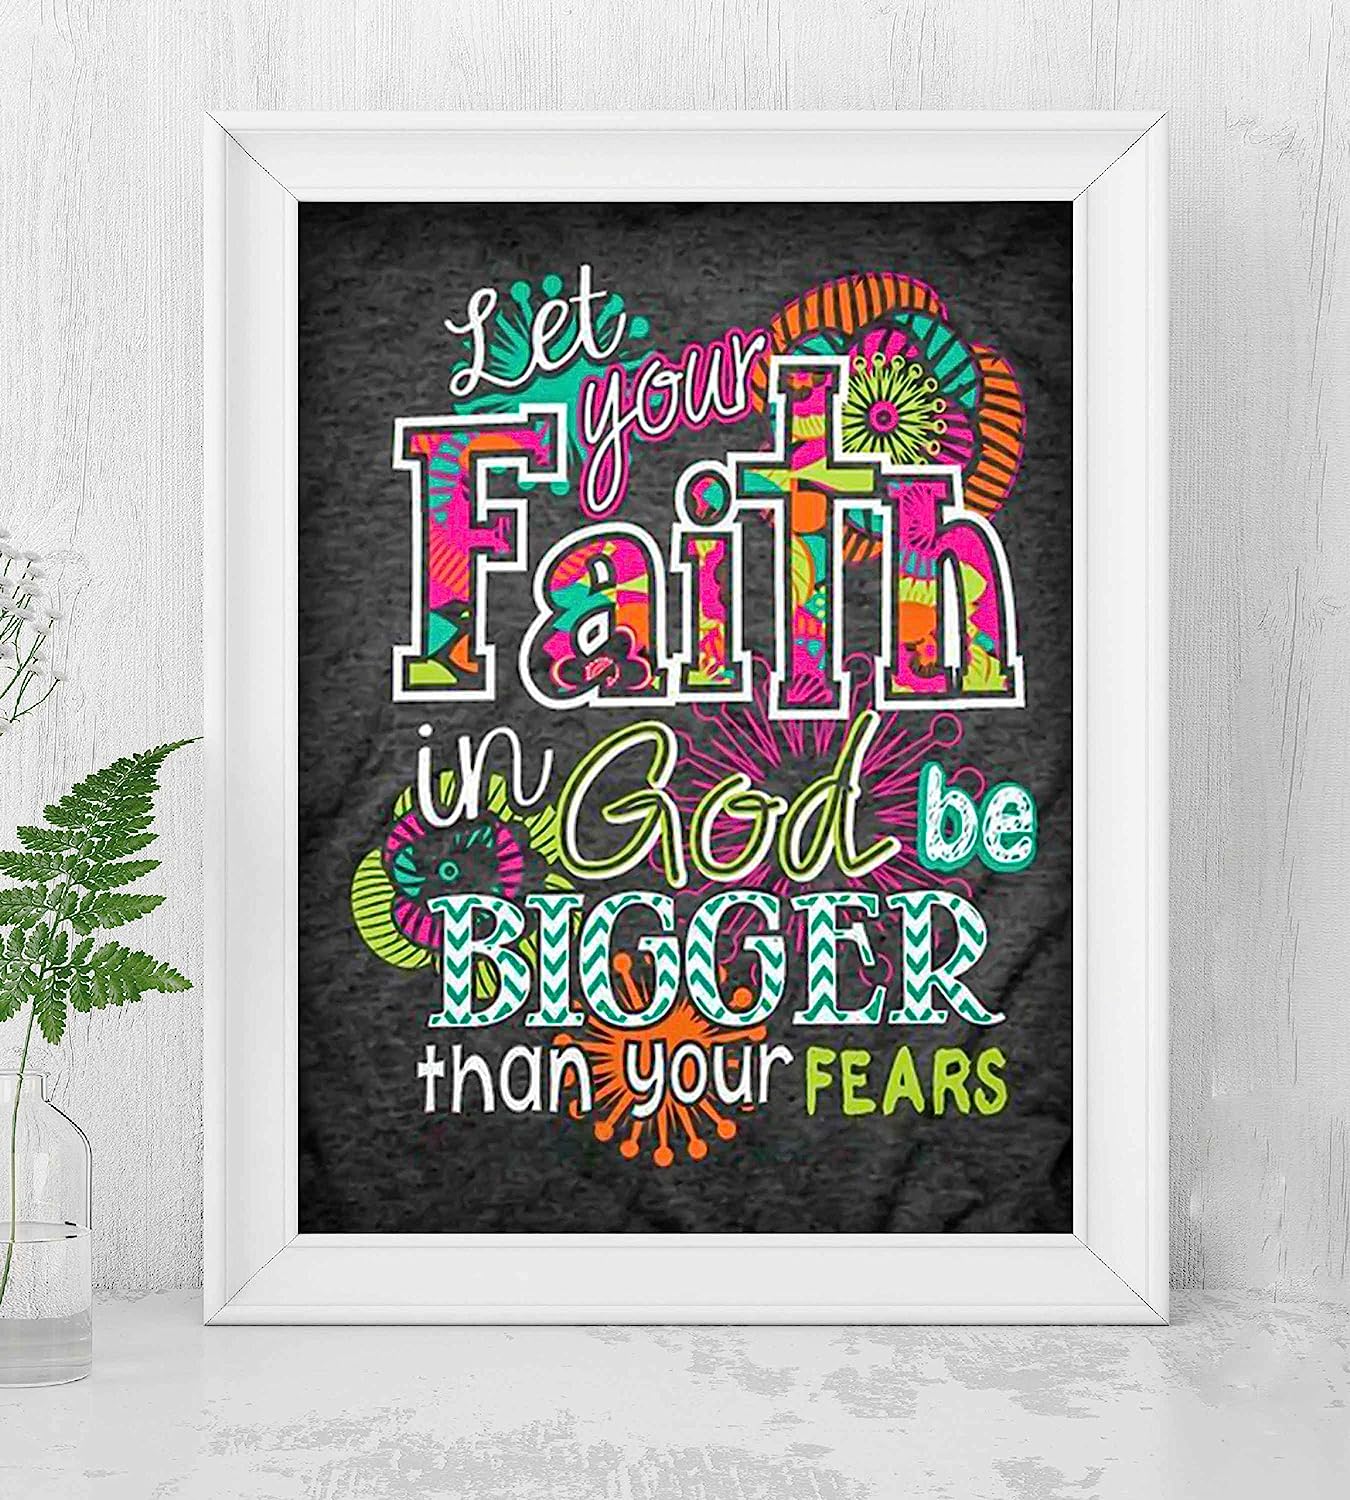 ?Faith In God-Bigger Than Fears?-Inspirational Wall Art Sign-8 x 10" Shabby Chic Abstract Poster Print-Ready to Frame. Home-Bedroom-Office-Dorm-Church D?cor. Perfect Christian Gift for Teens!